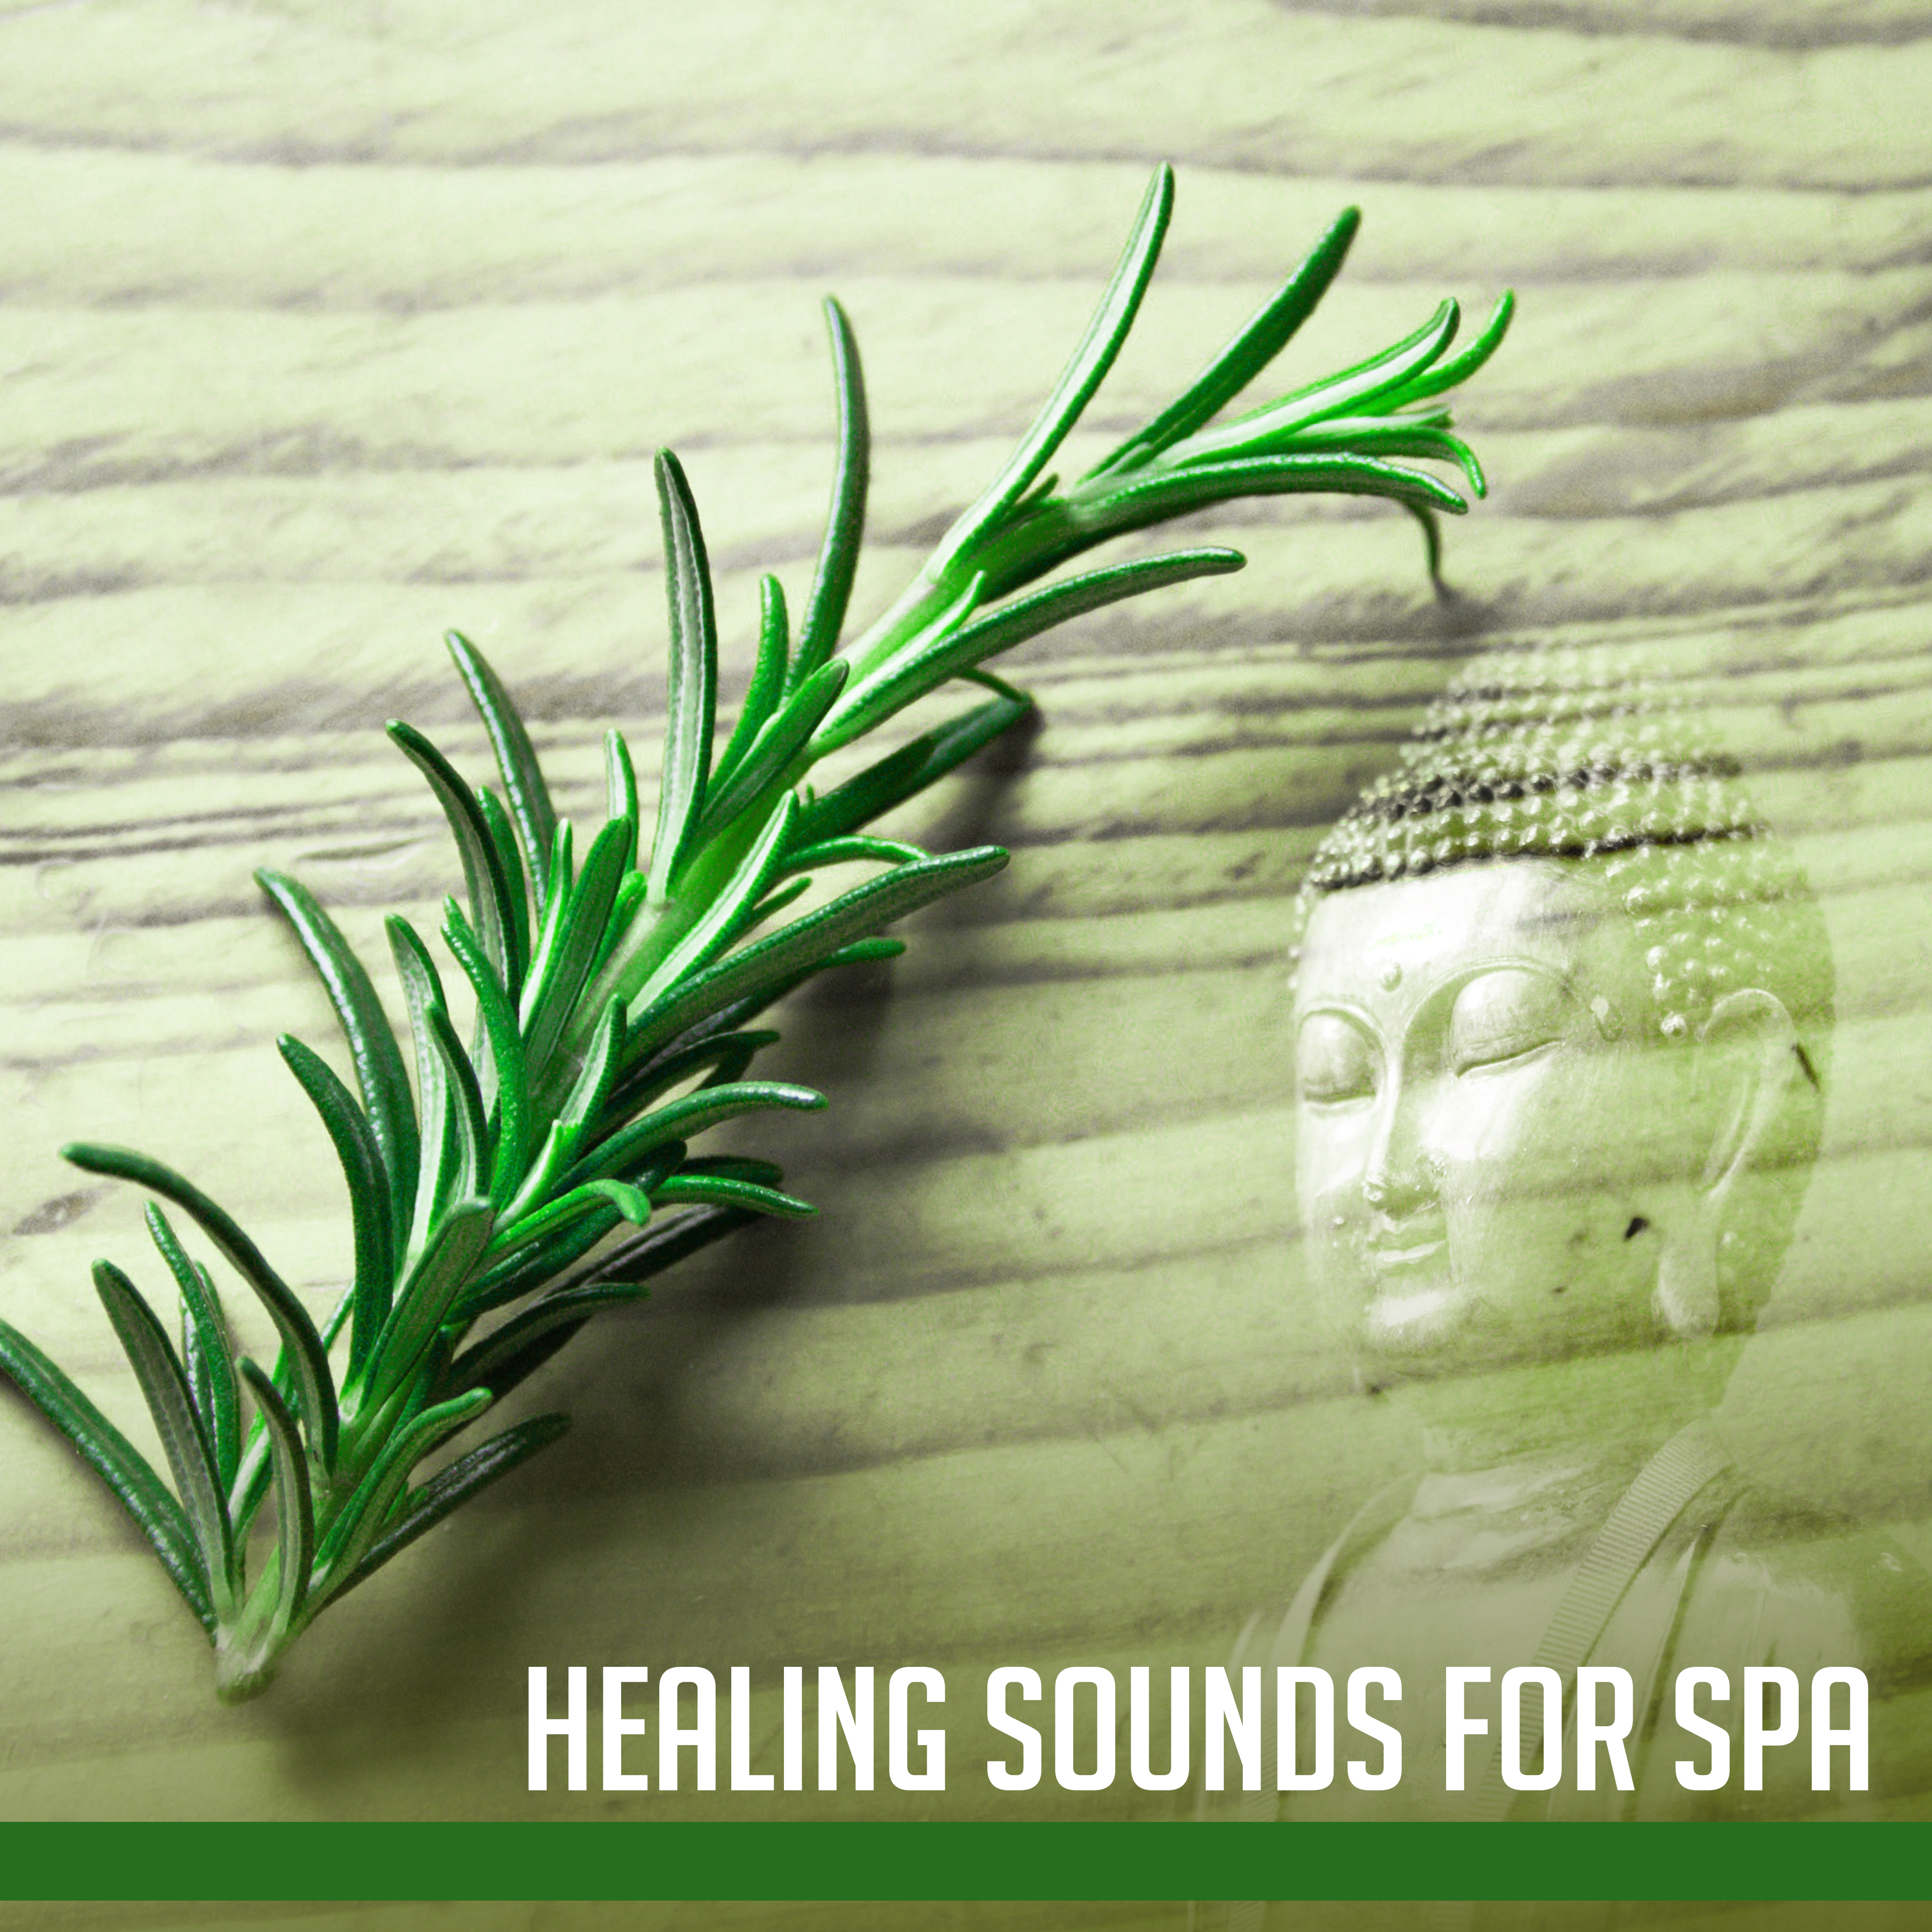 Healing Sounds for Spa – Relaxation Wellness, Calming Melodies, Pure Massage, Deep Relief, Oriental Flute, Spa Music, Soothing Nature Sounds